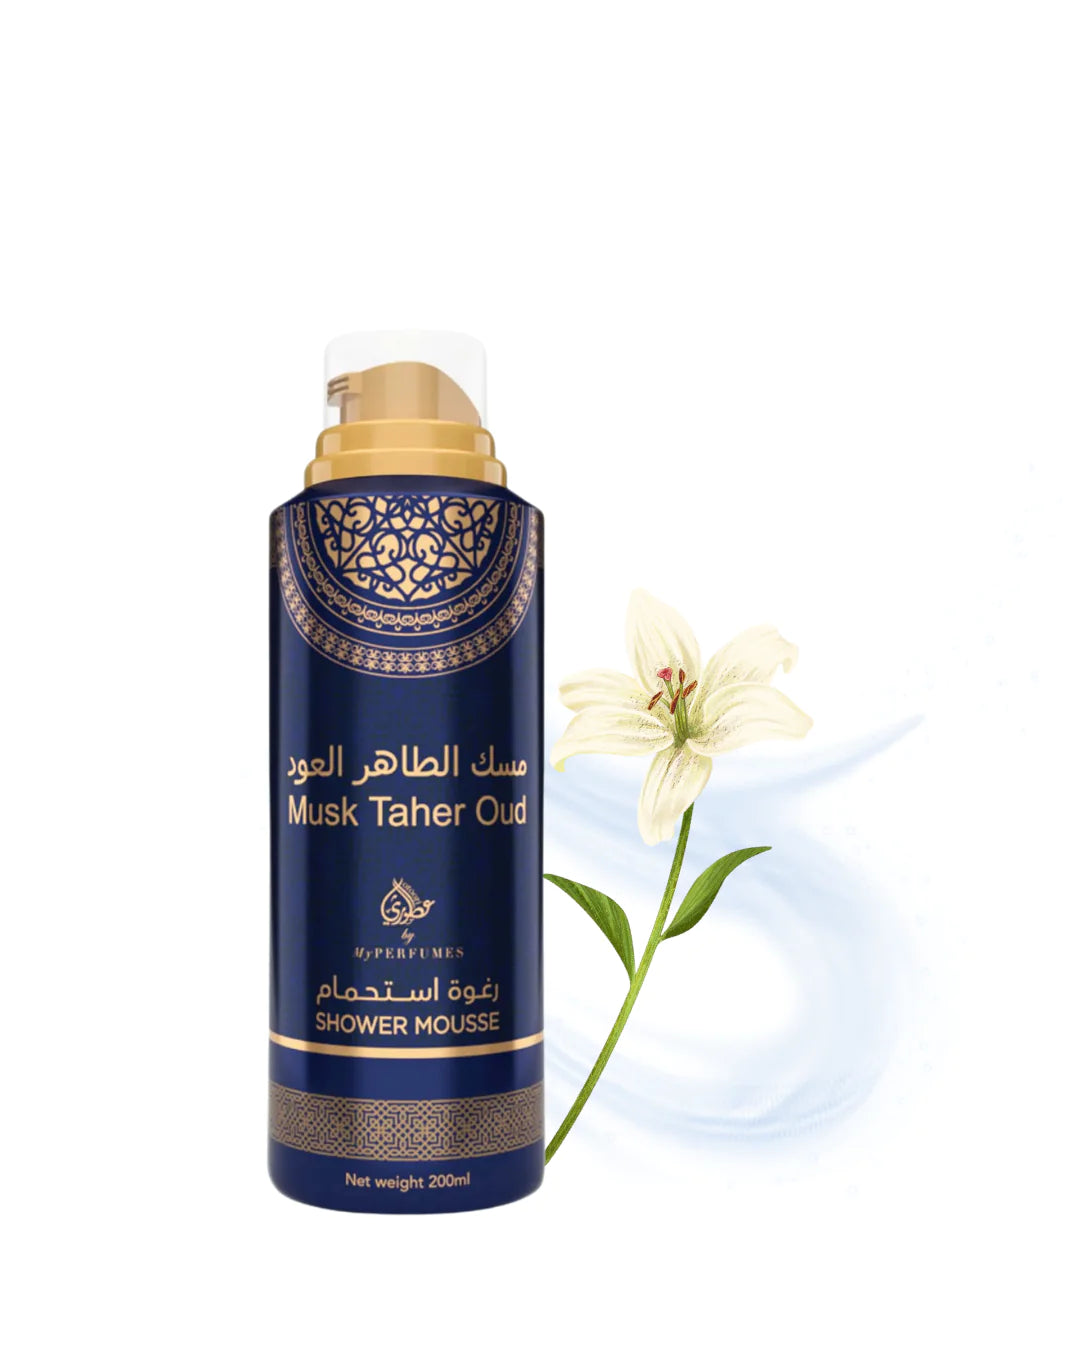 Musk Taher Oud 200ml - Shower Mousse